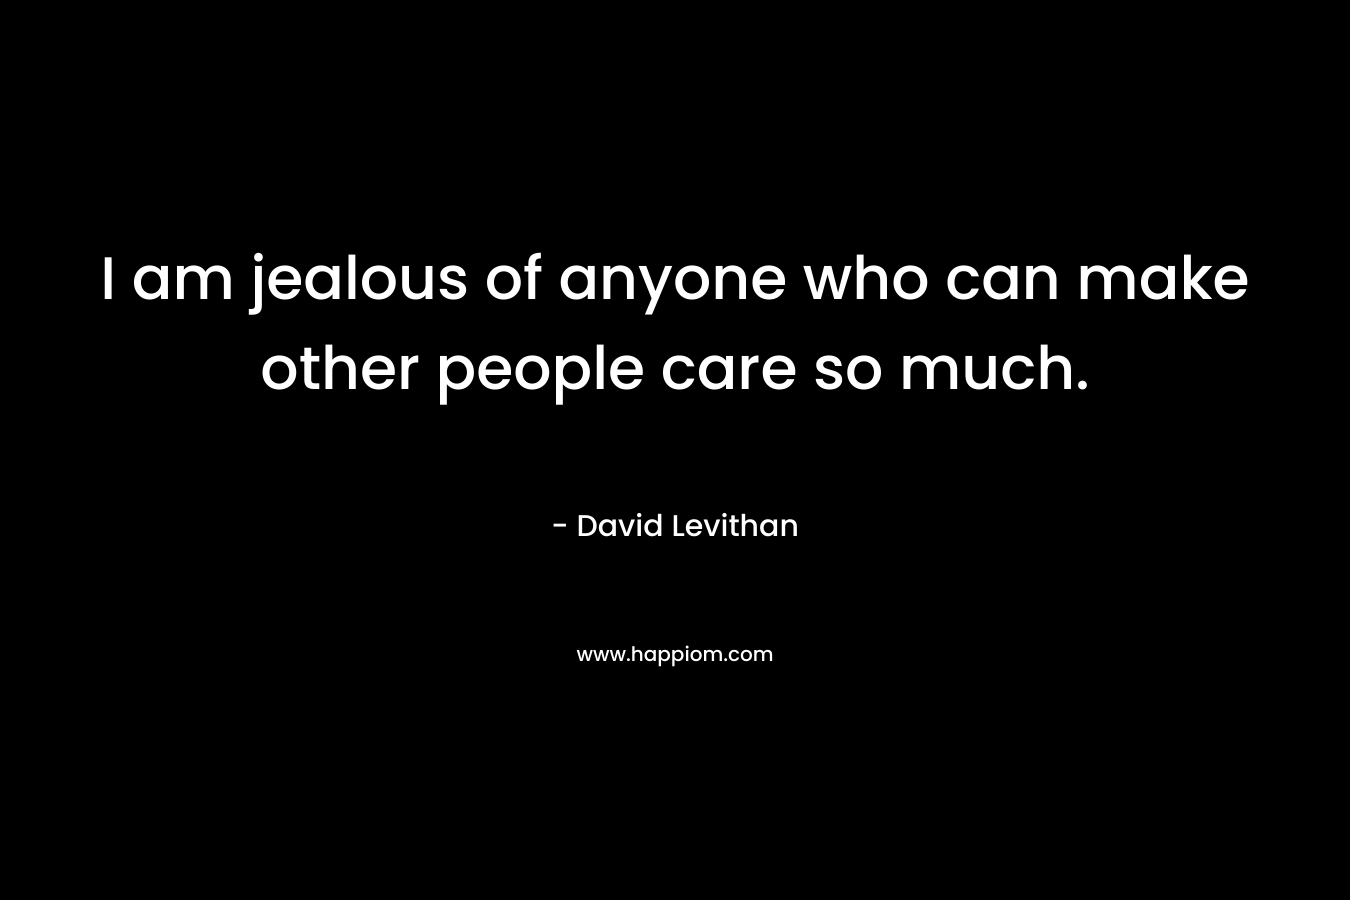 I am jealous of anyone who can make other people care so much.